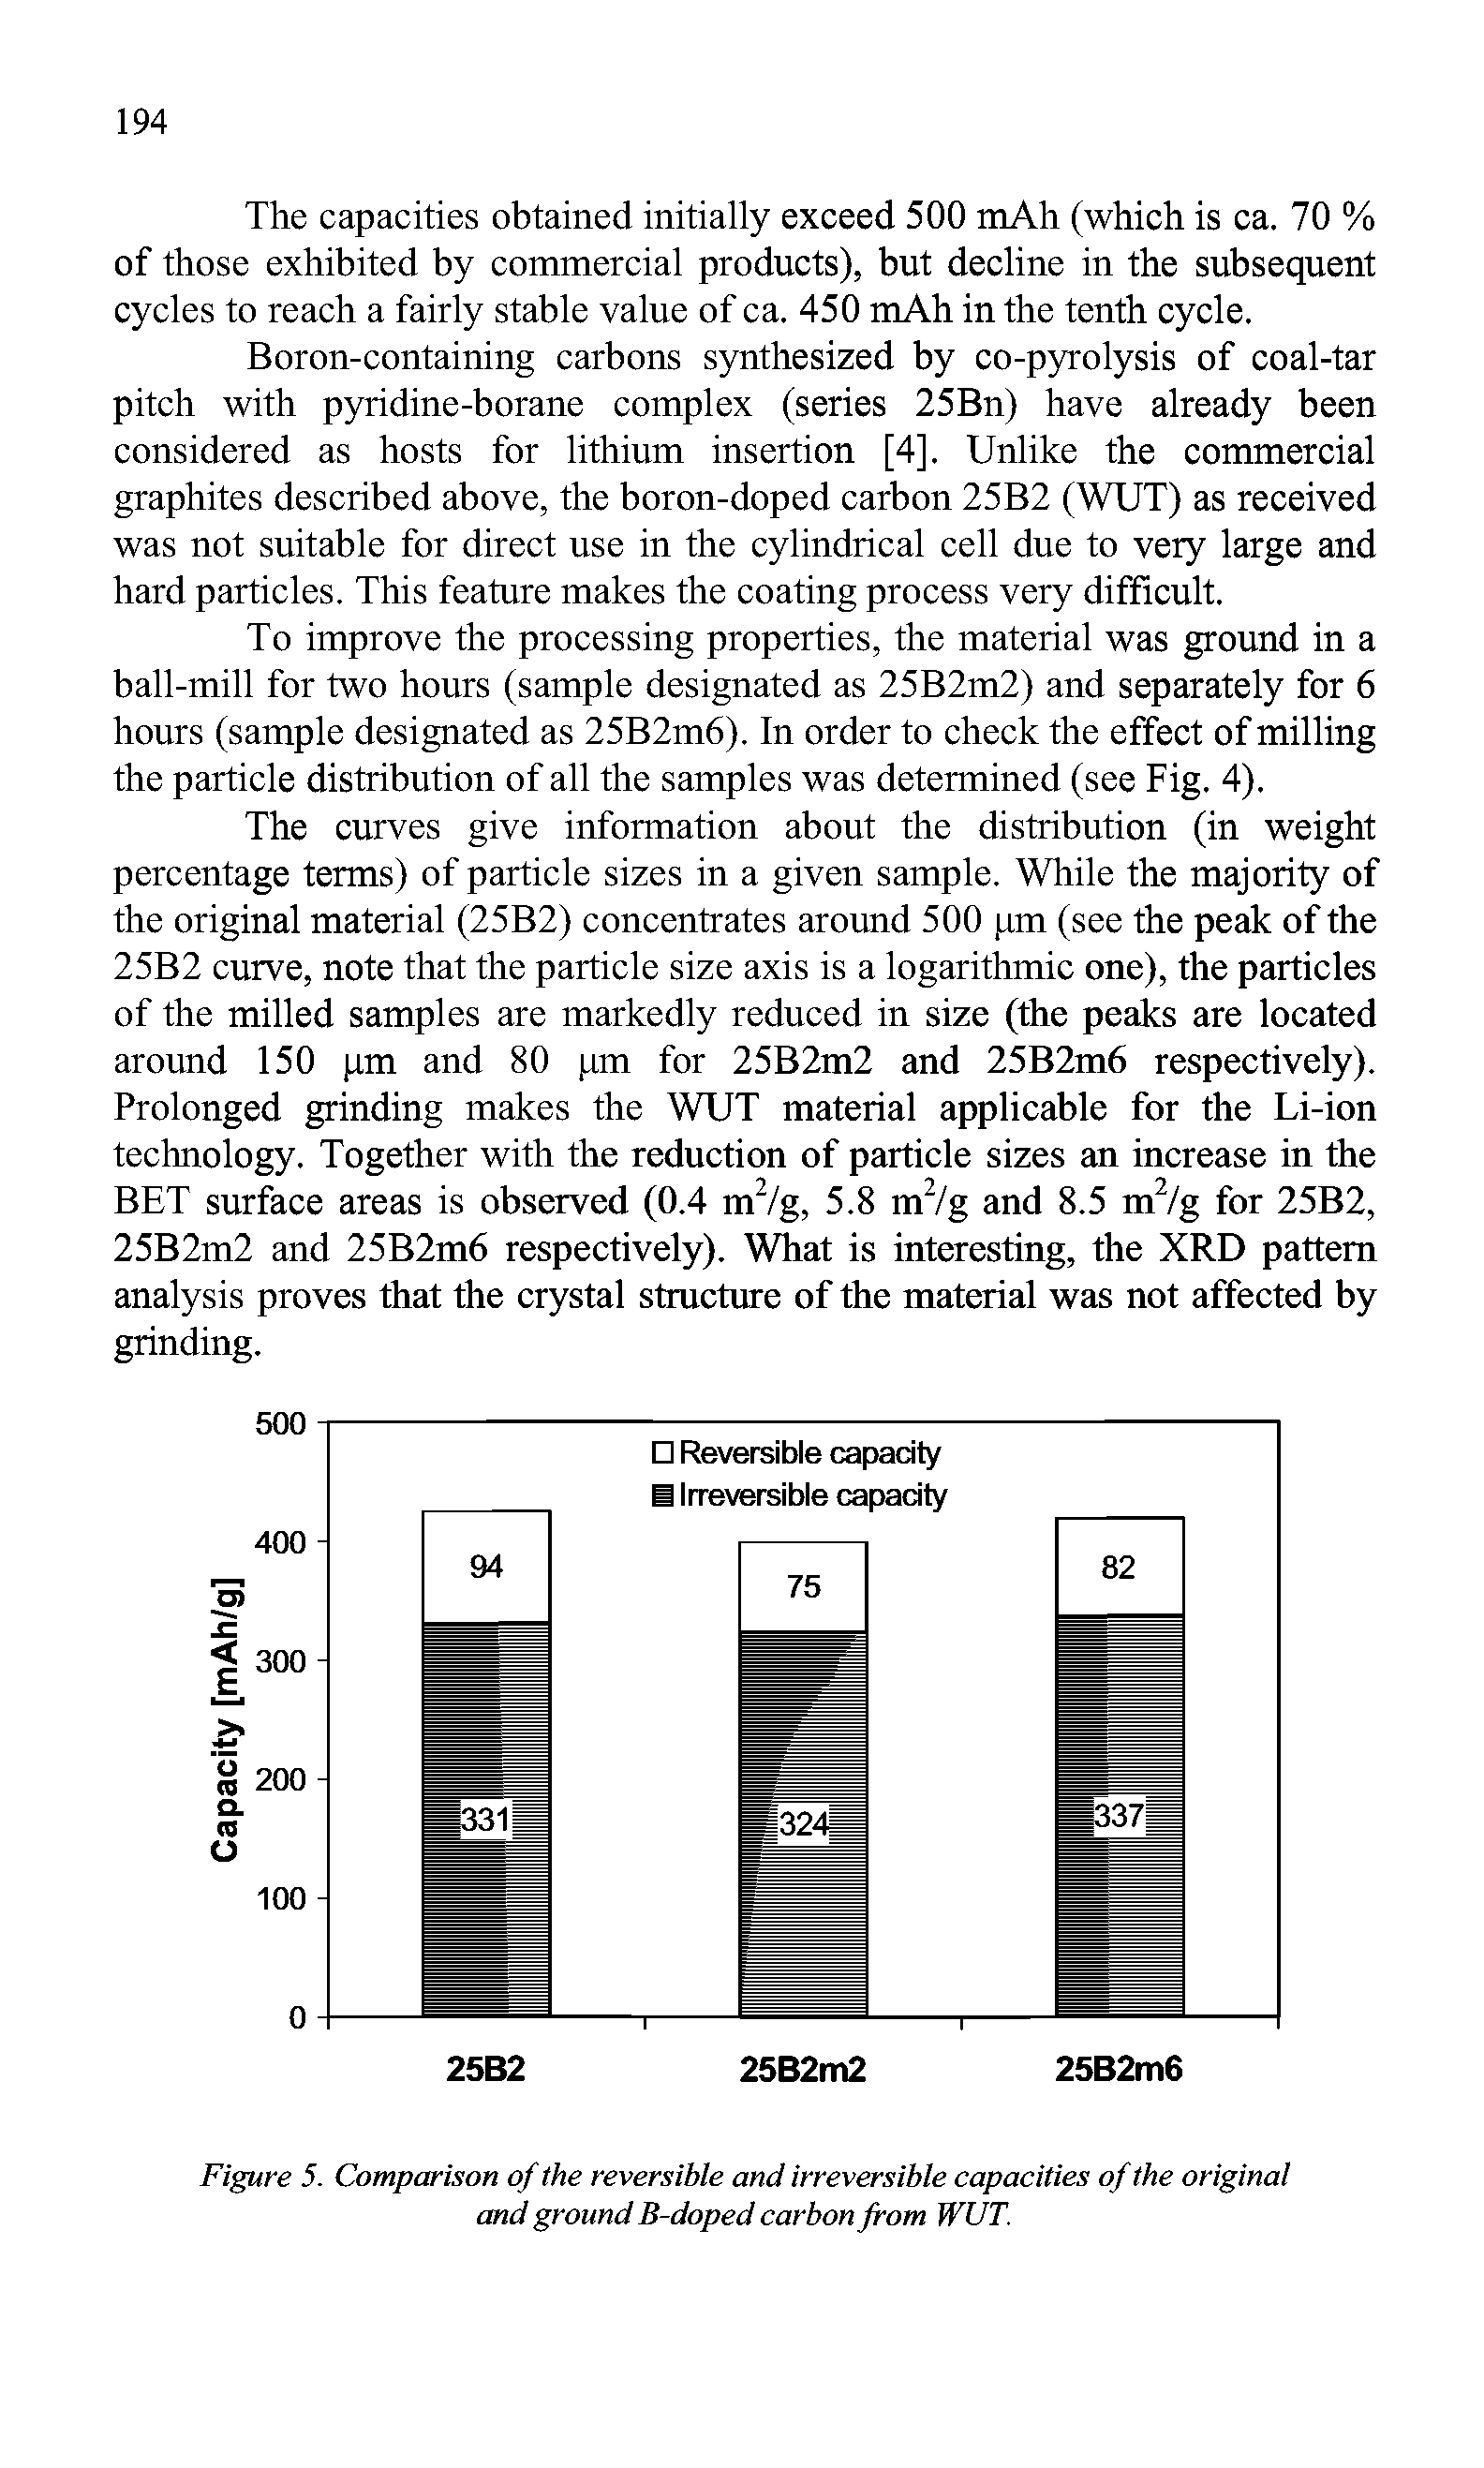 Figure 5. Comparison of the reversible and irreversible capacities of the original and ground B-doped carbon from WUT.